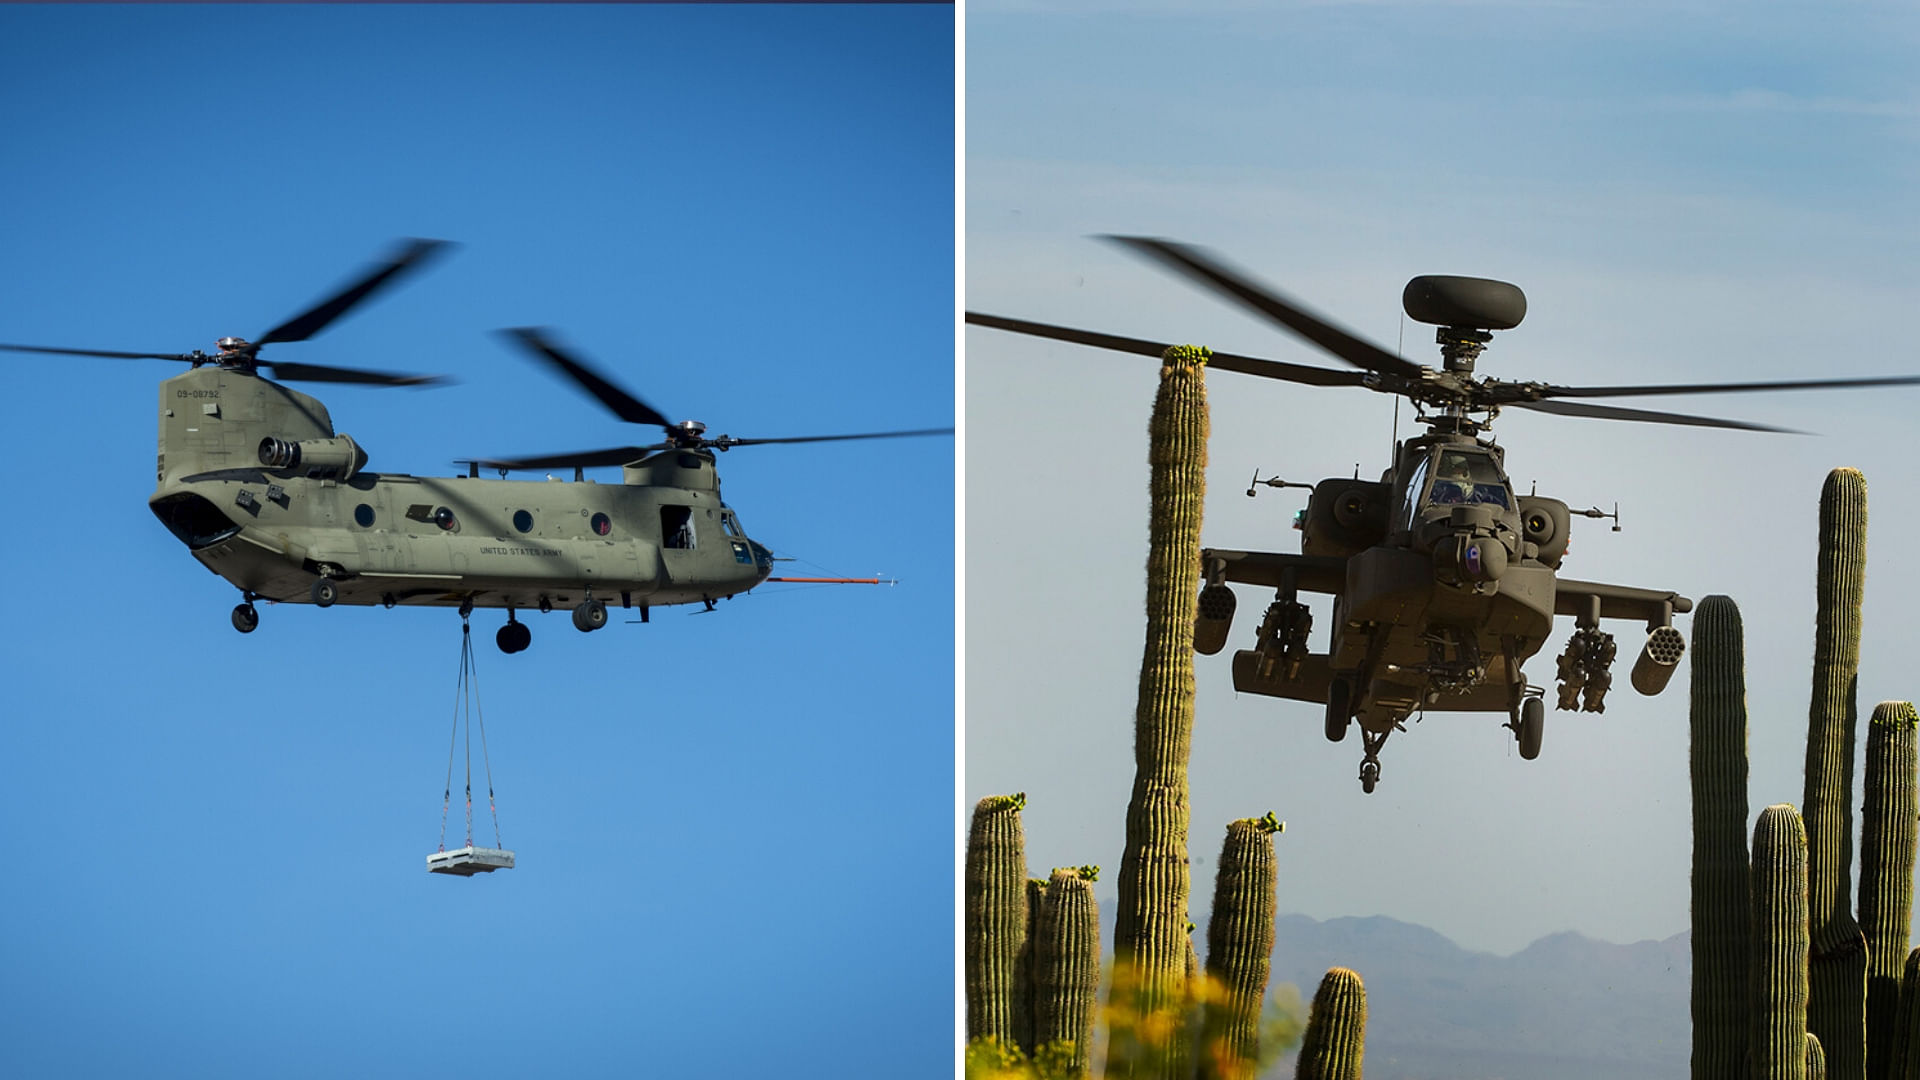 The Chinook (left) and the Apache (right) choppers in action.